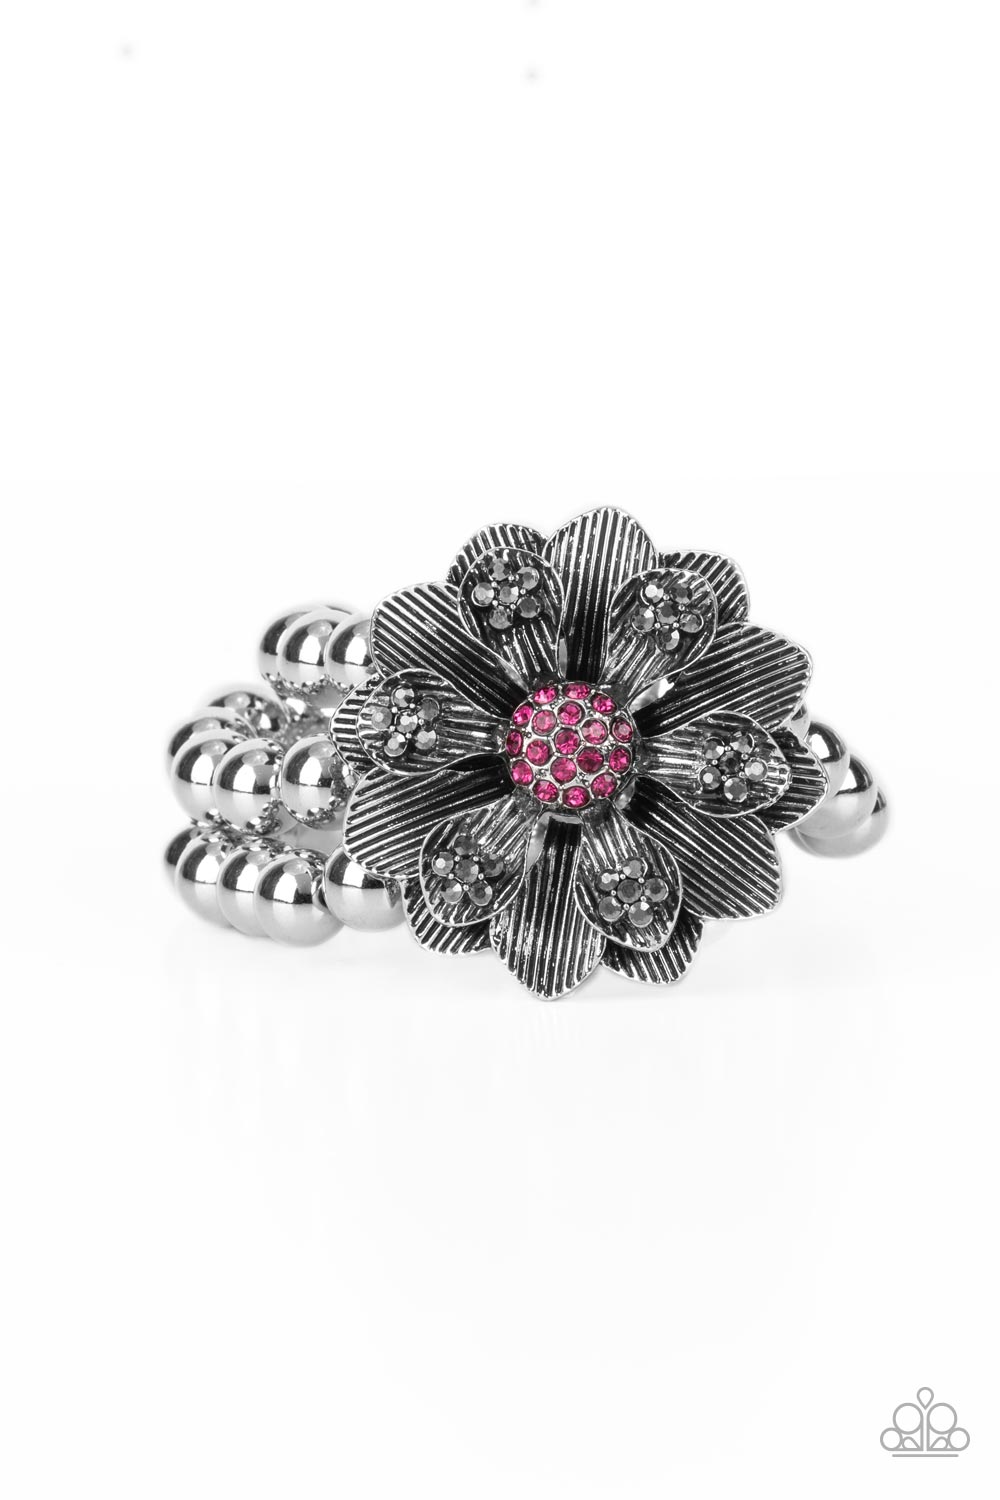 Botanical Bravado Pink Bracelet - Paparazzi Accessories  A daring oversized silver flower is composed of petals lined in antiqued silver and dotted with smoky hematite rhinestones. A sphere of dainty Fuchsia Fedora rhinestones creates the center of the flower as it sits atop a trio of shiny silver beaded stretchy bands around the wrist for a dramatically whimsical look.  Sold as one individual bracelet.